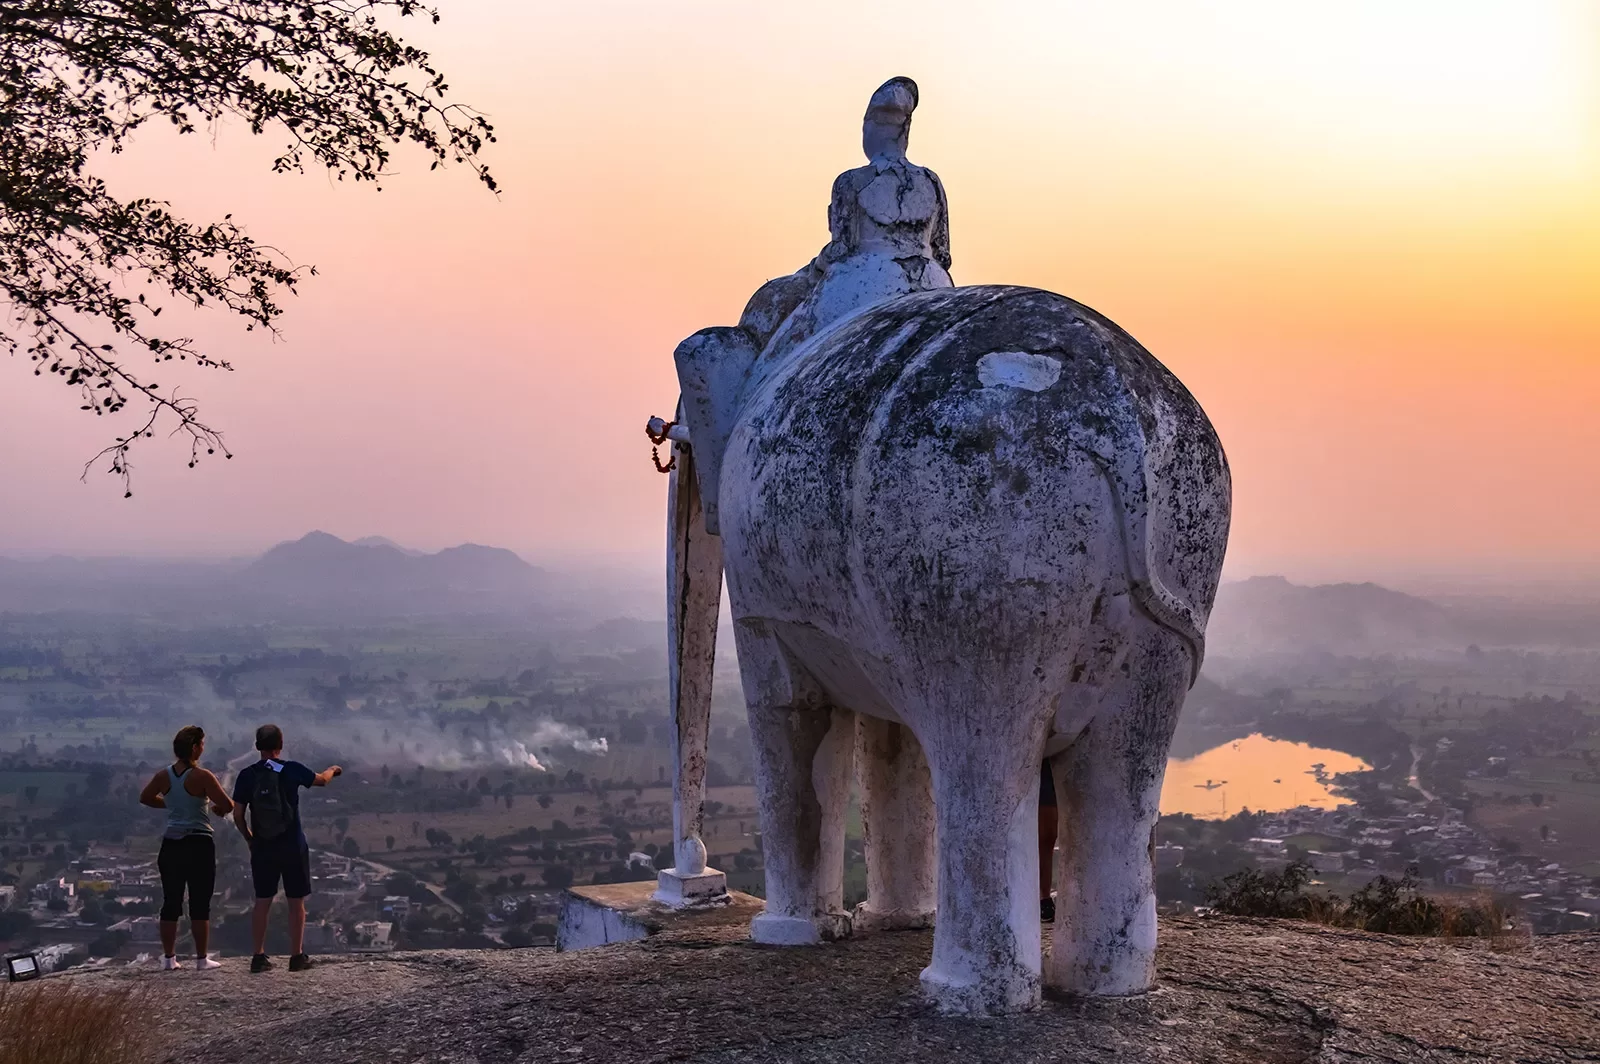 Two people standing beside a large elephant statue as the sun sets in India